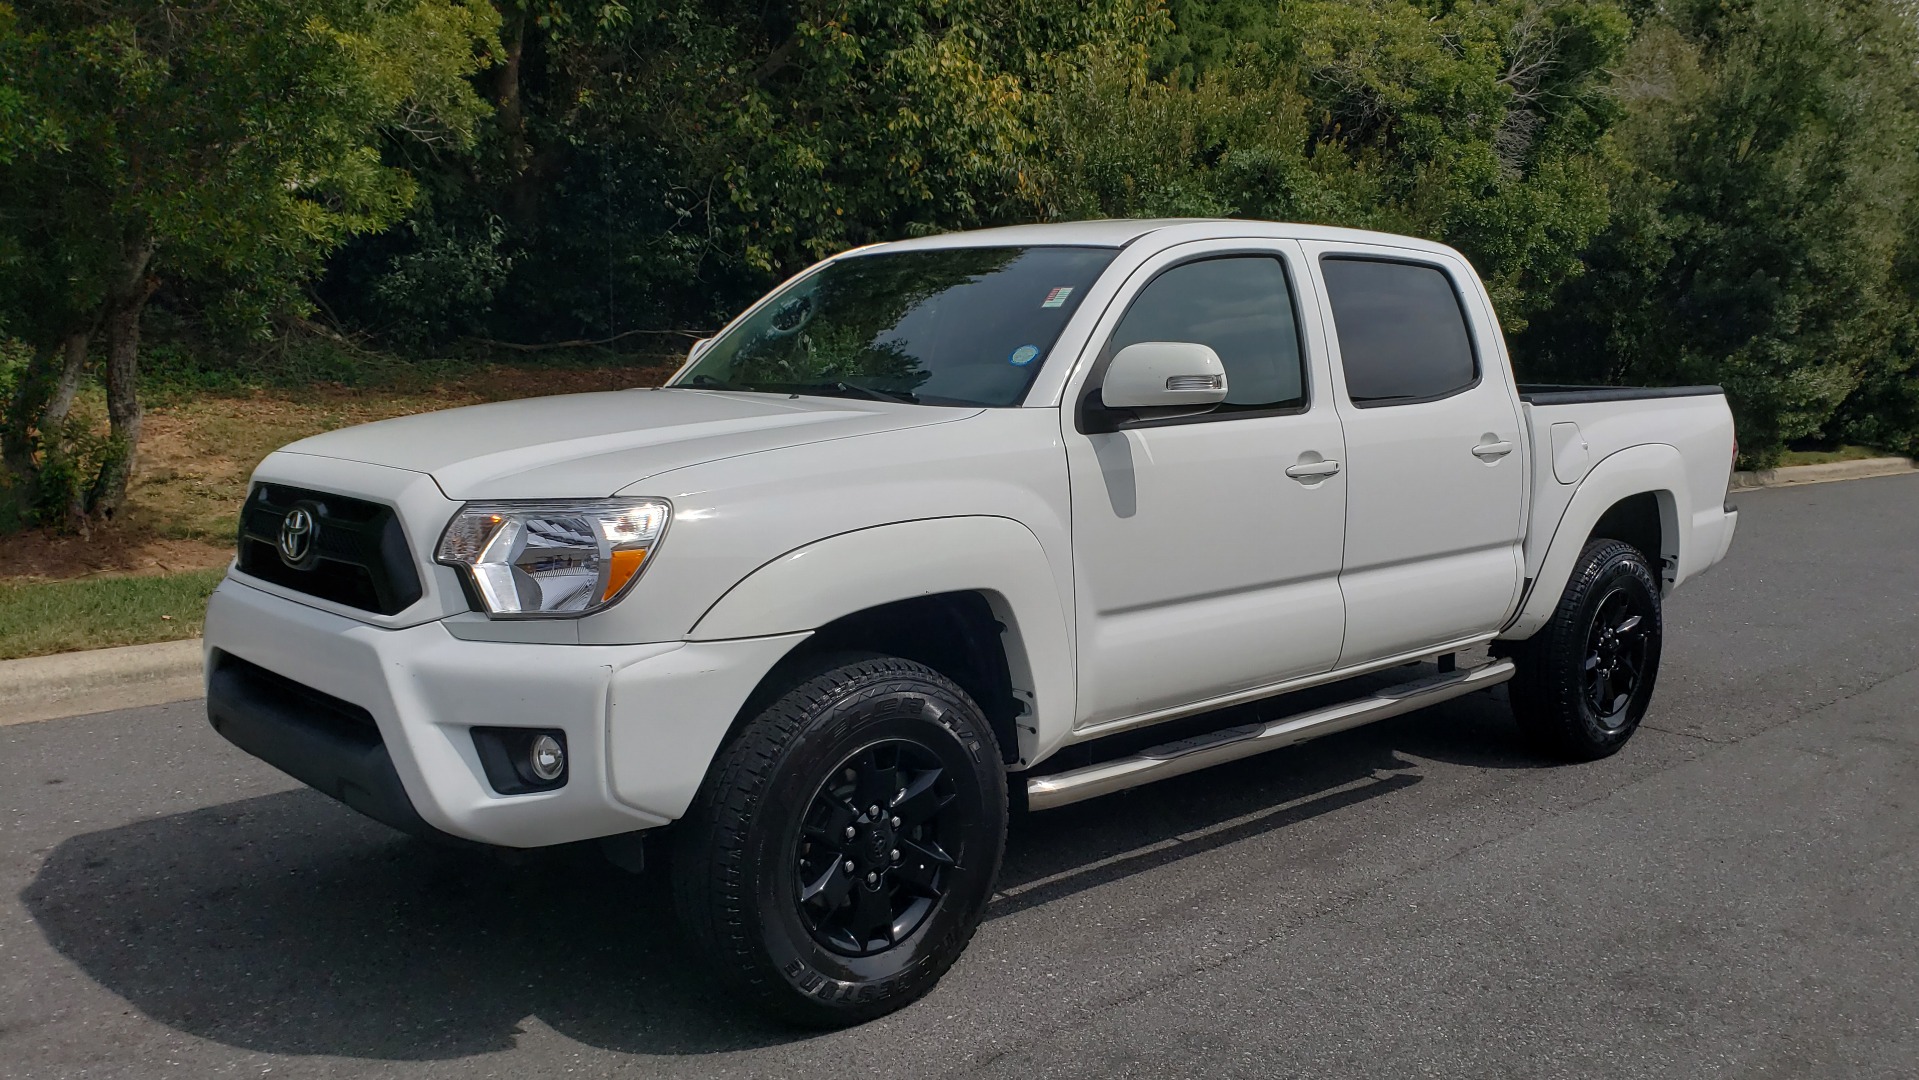 Used 2015 Toyota TACOMA PRERUNNER DOUBLE CAB/ 4-CYL / 4-SPD AUTO / SR PKG / CONV PKG for sale Sold at Formula Imports in Charlotte NC 28227 1